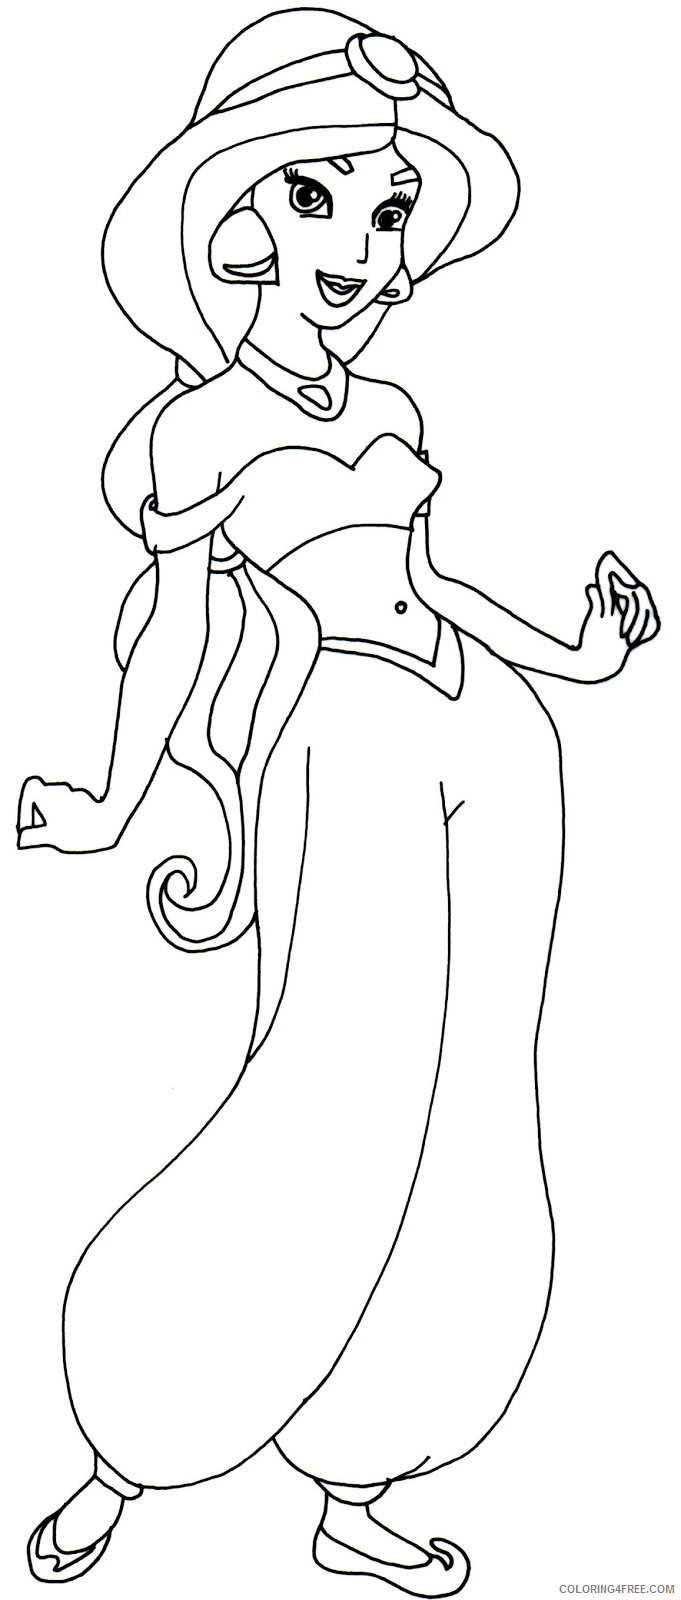 jasmine coloring pages for kids Coloring4free